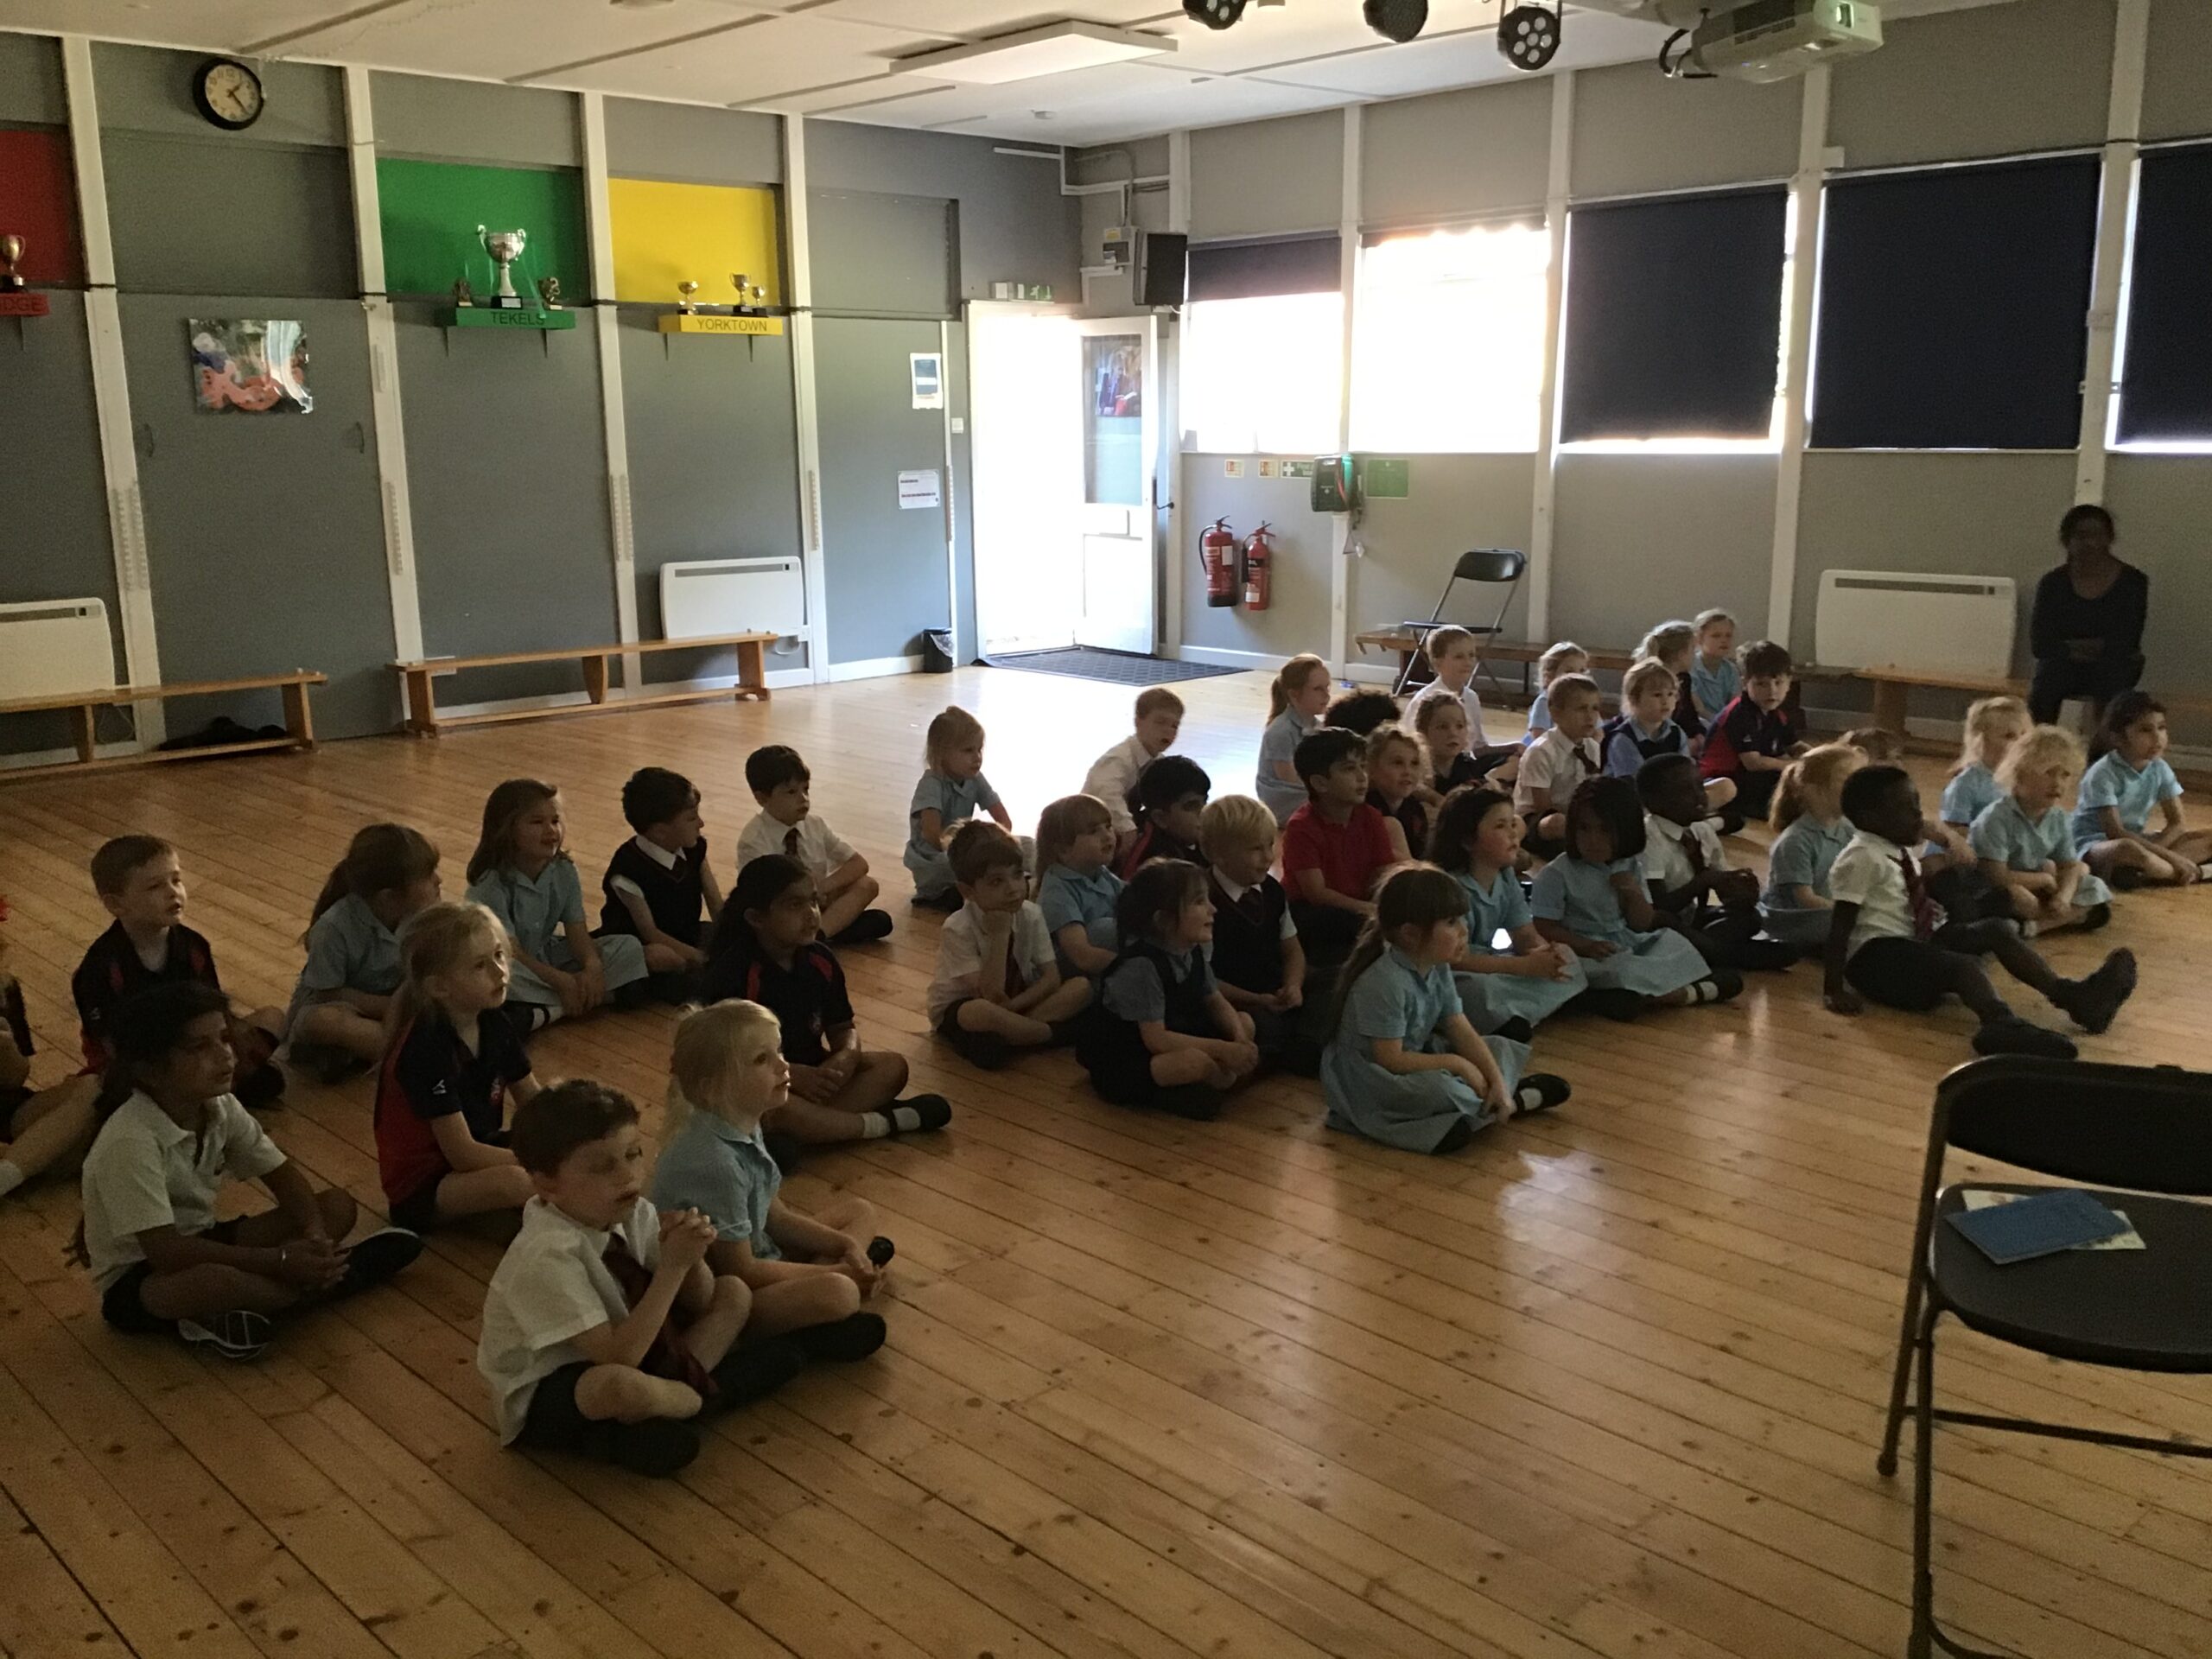 Lower School singing, waiting for instruction!